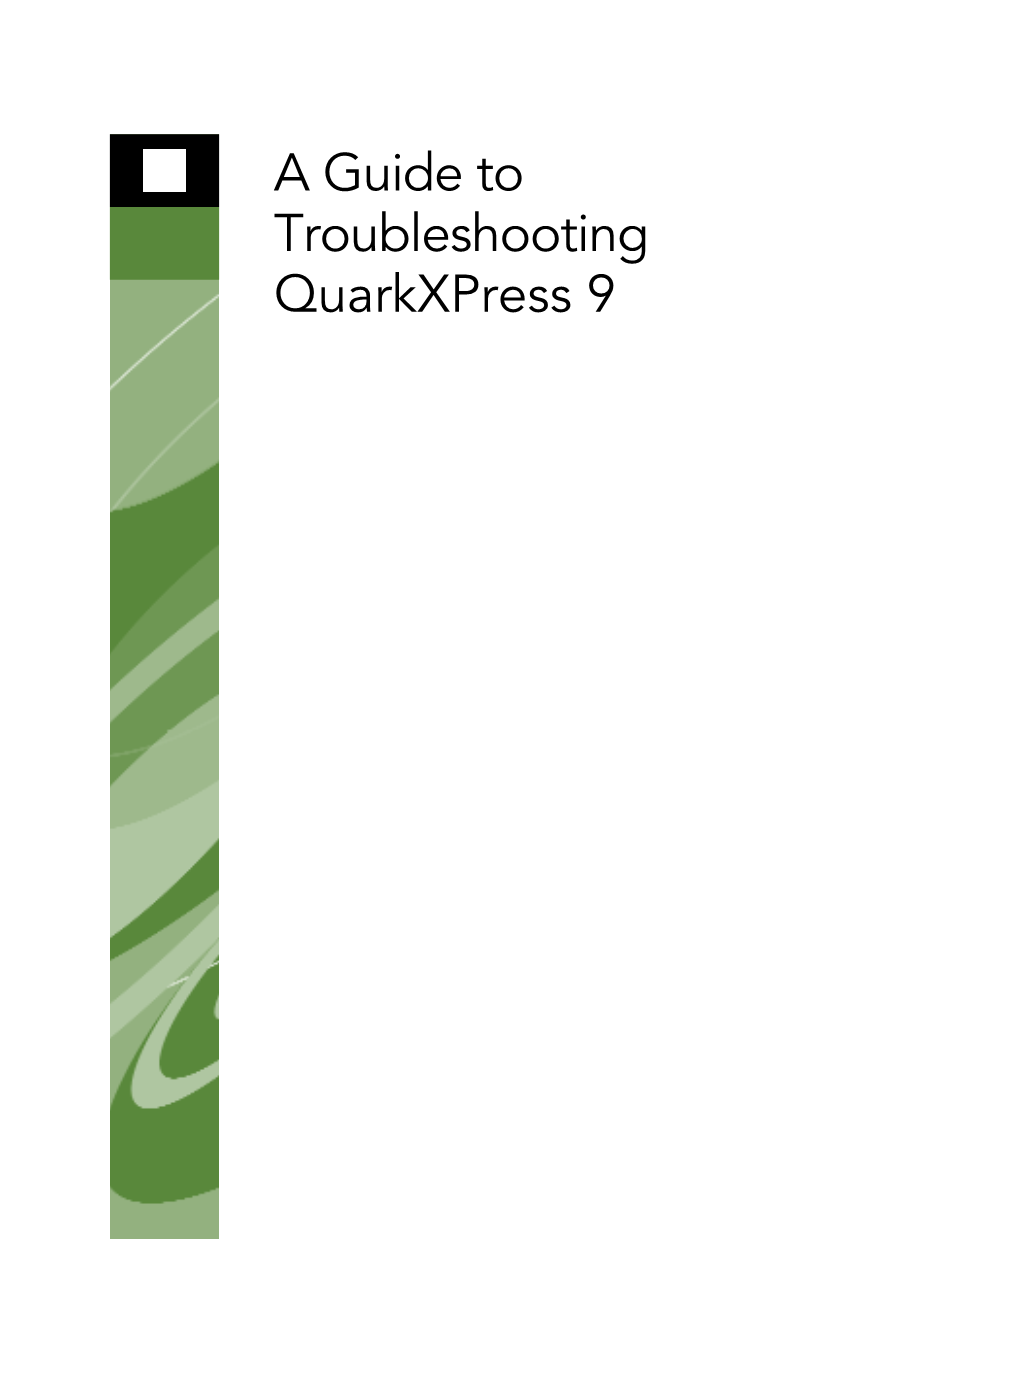 A Guide to Troubleshooting Quarkxpress 9 LEGAL NOTICES